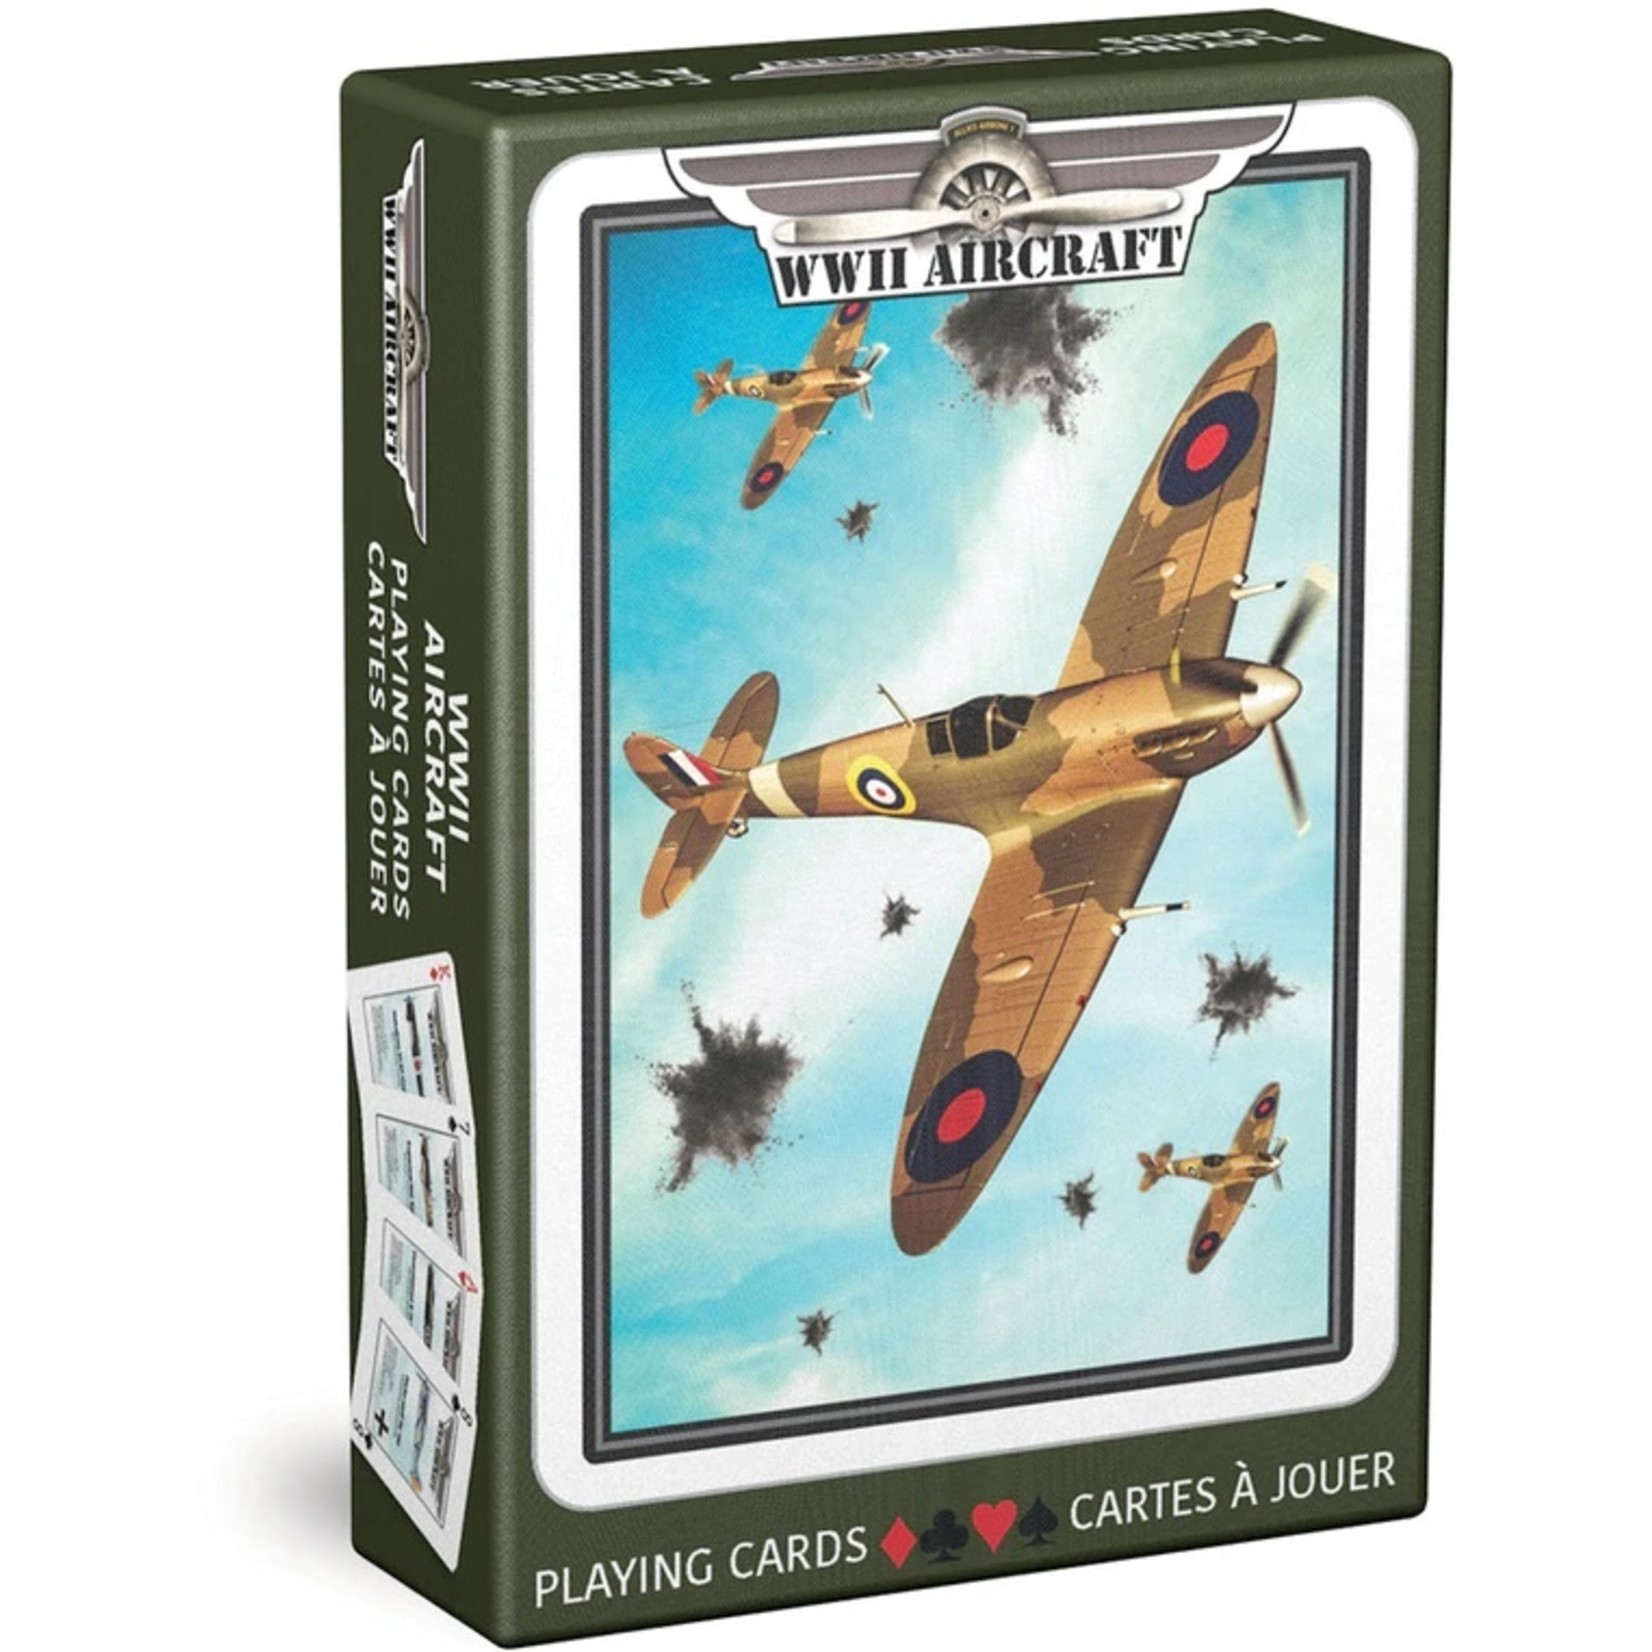 EuroGraphics Puzzles WWII Aircraft Pack playing cards